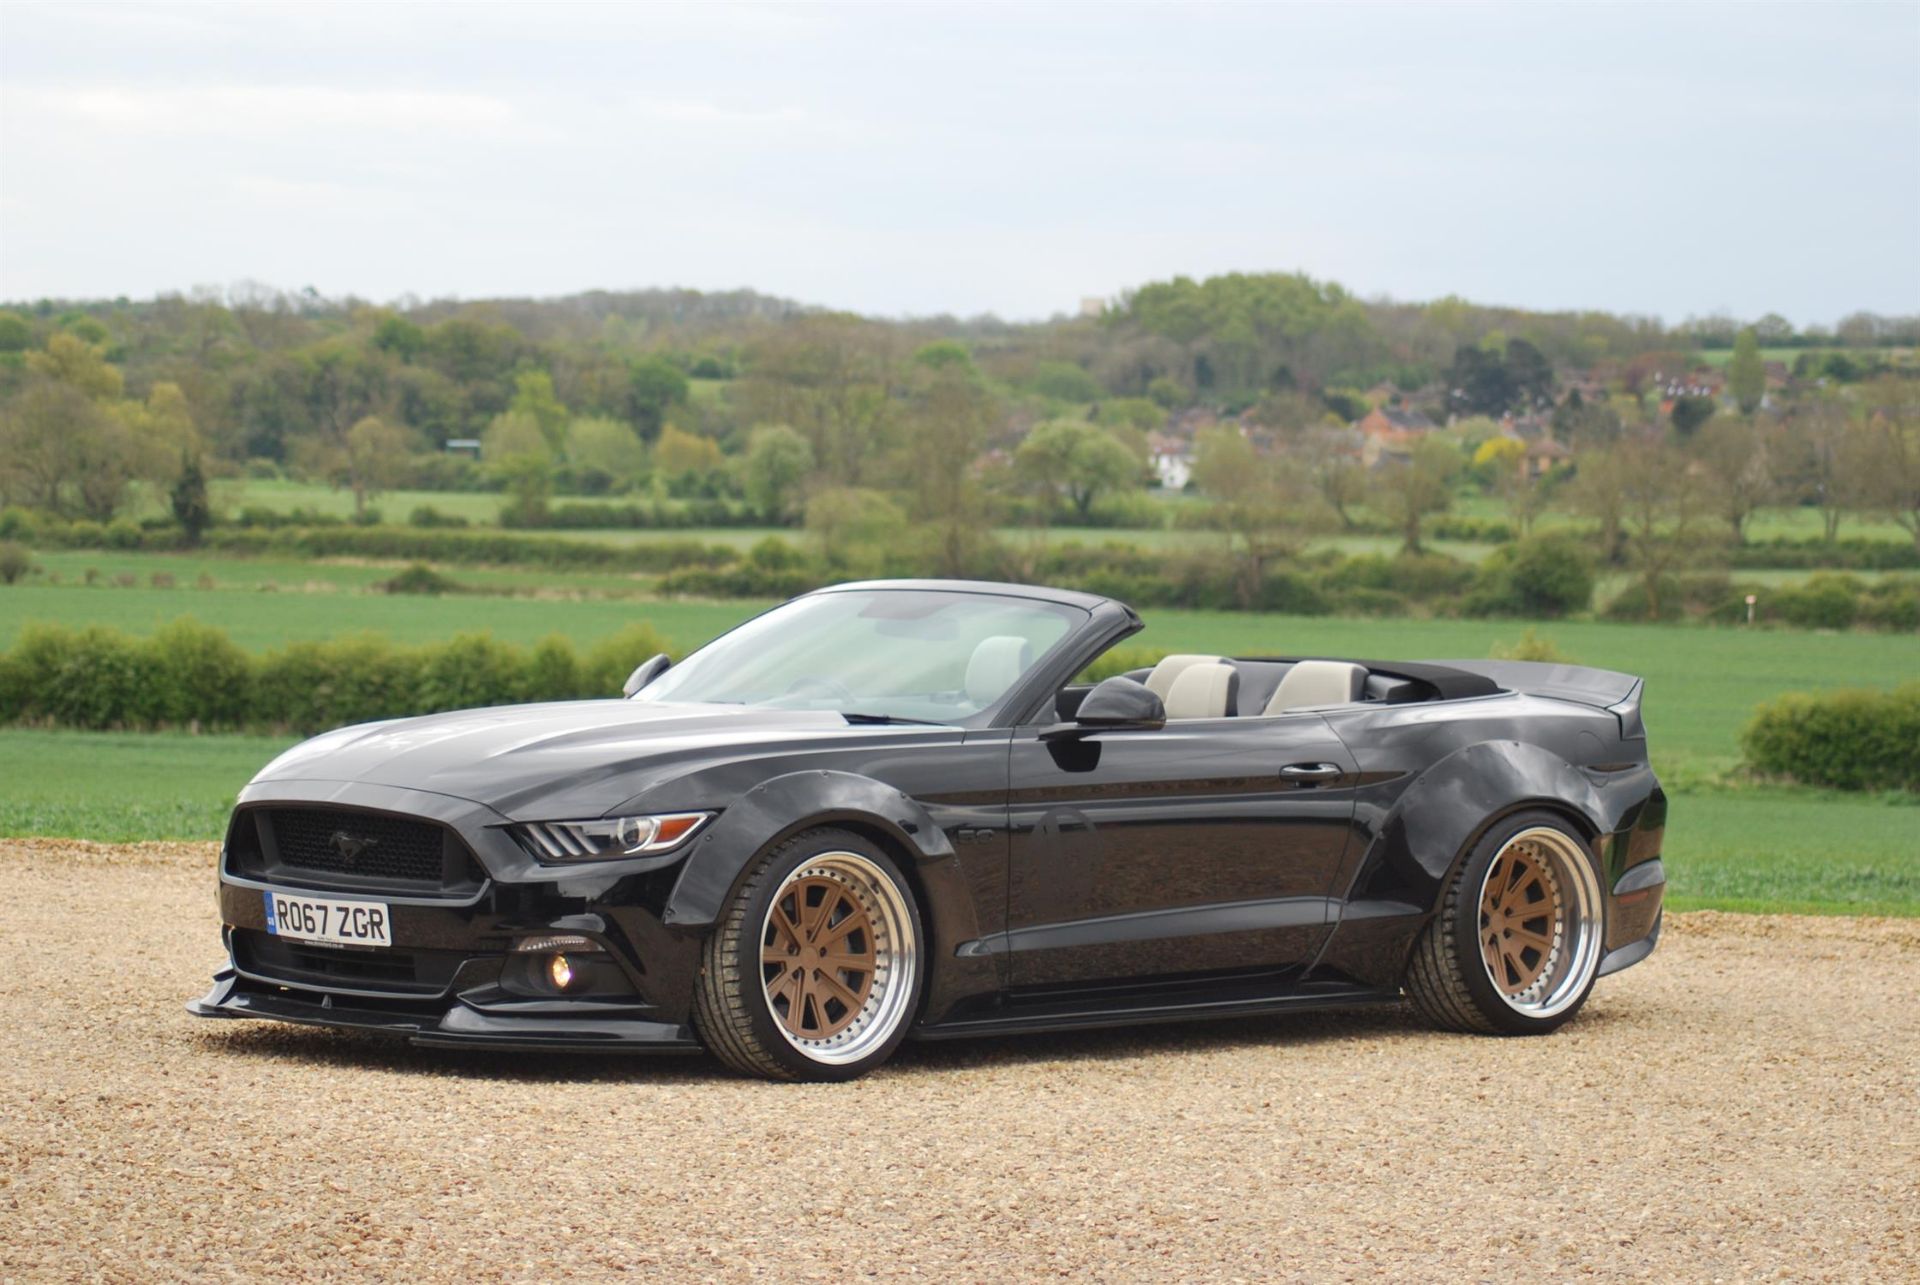 2017 Ford Mustang 5.0-Litre V8 GT Convertible 'Liberty Walk' - Image 8 of 10